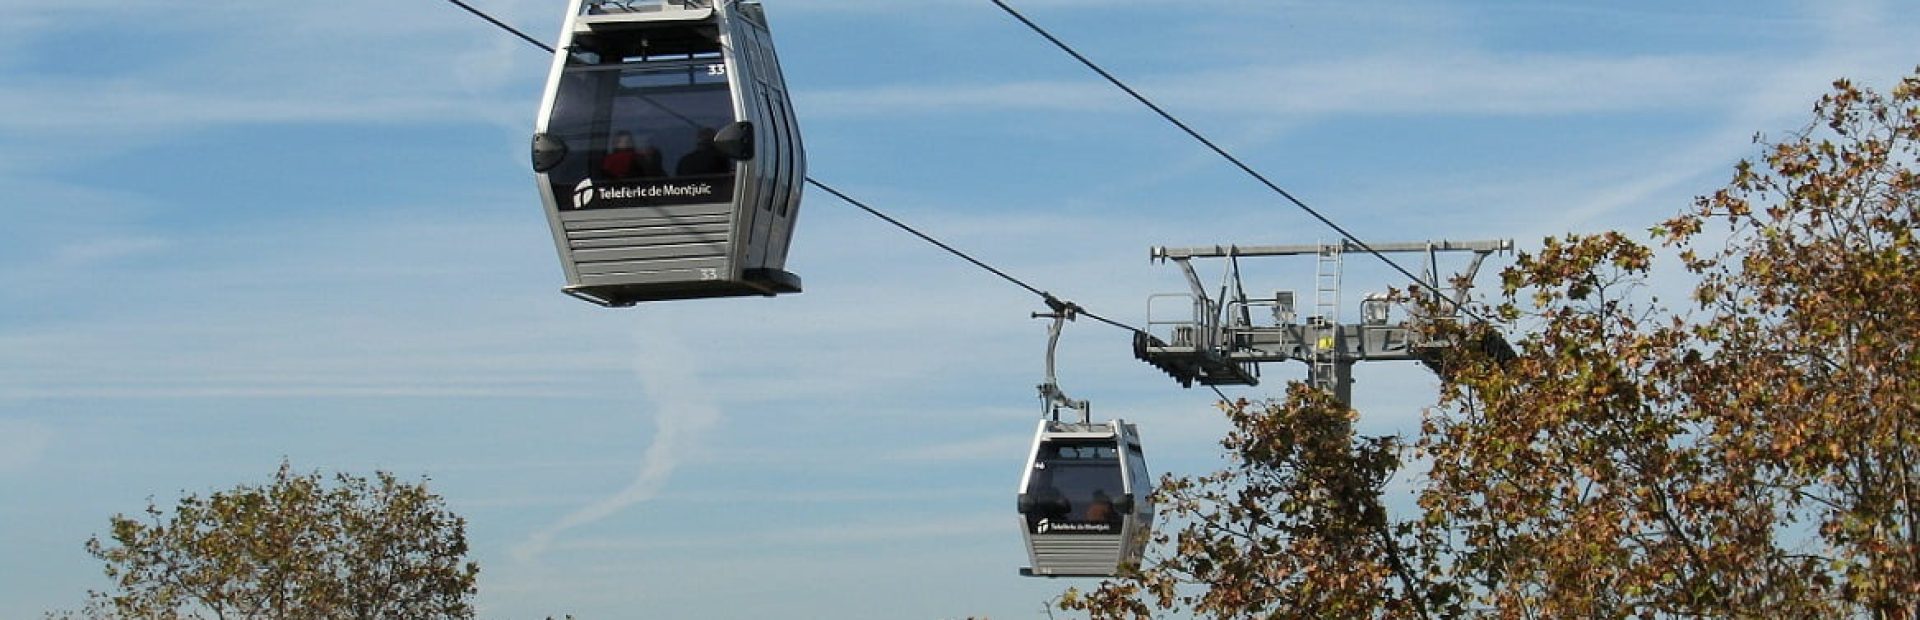 Cable car in Barcelona Glimpses of the World